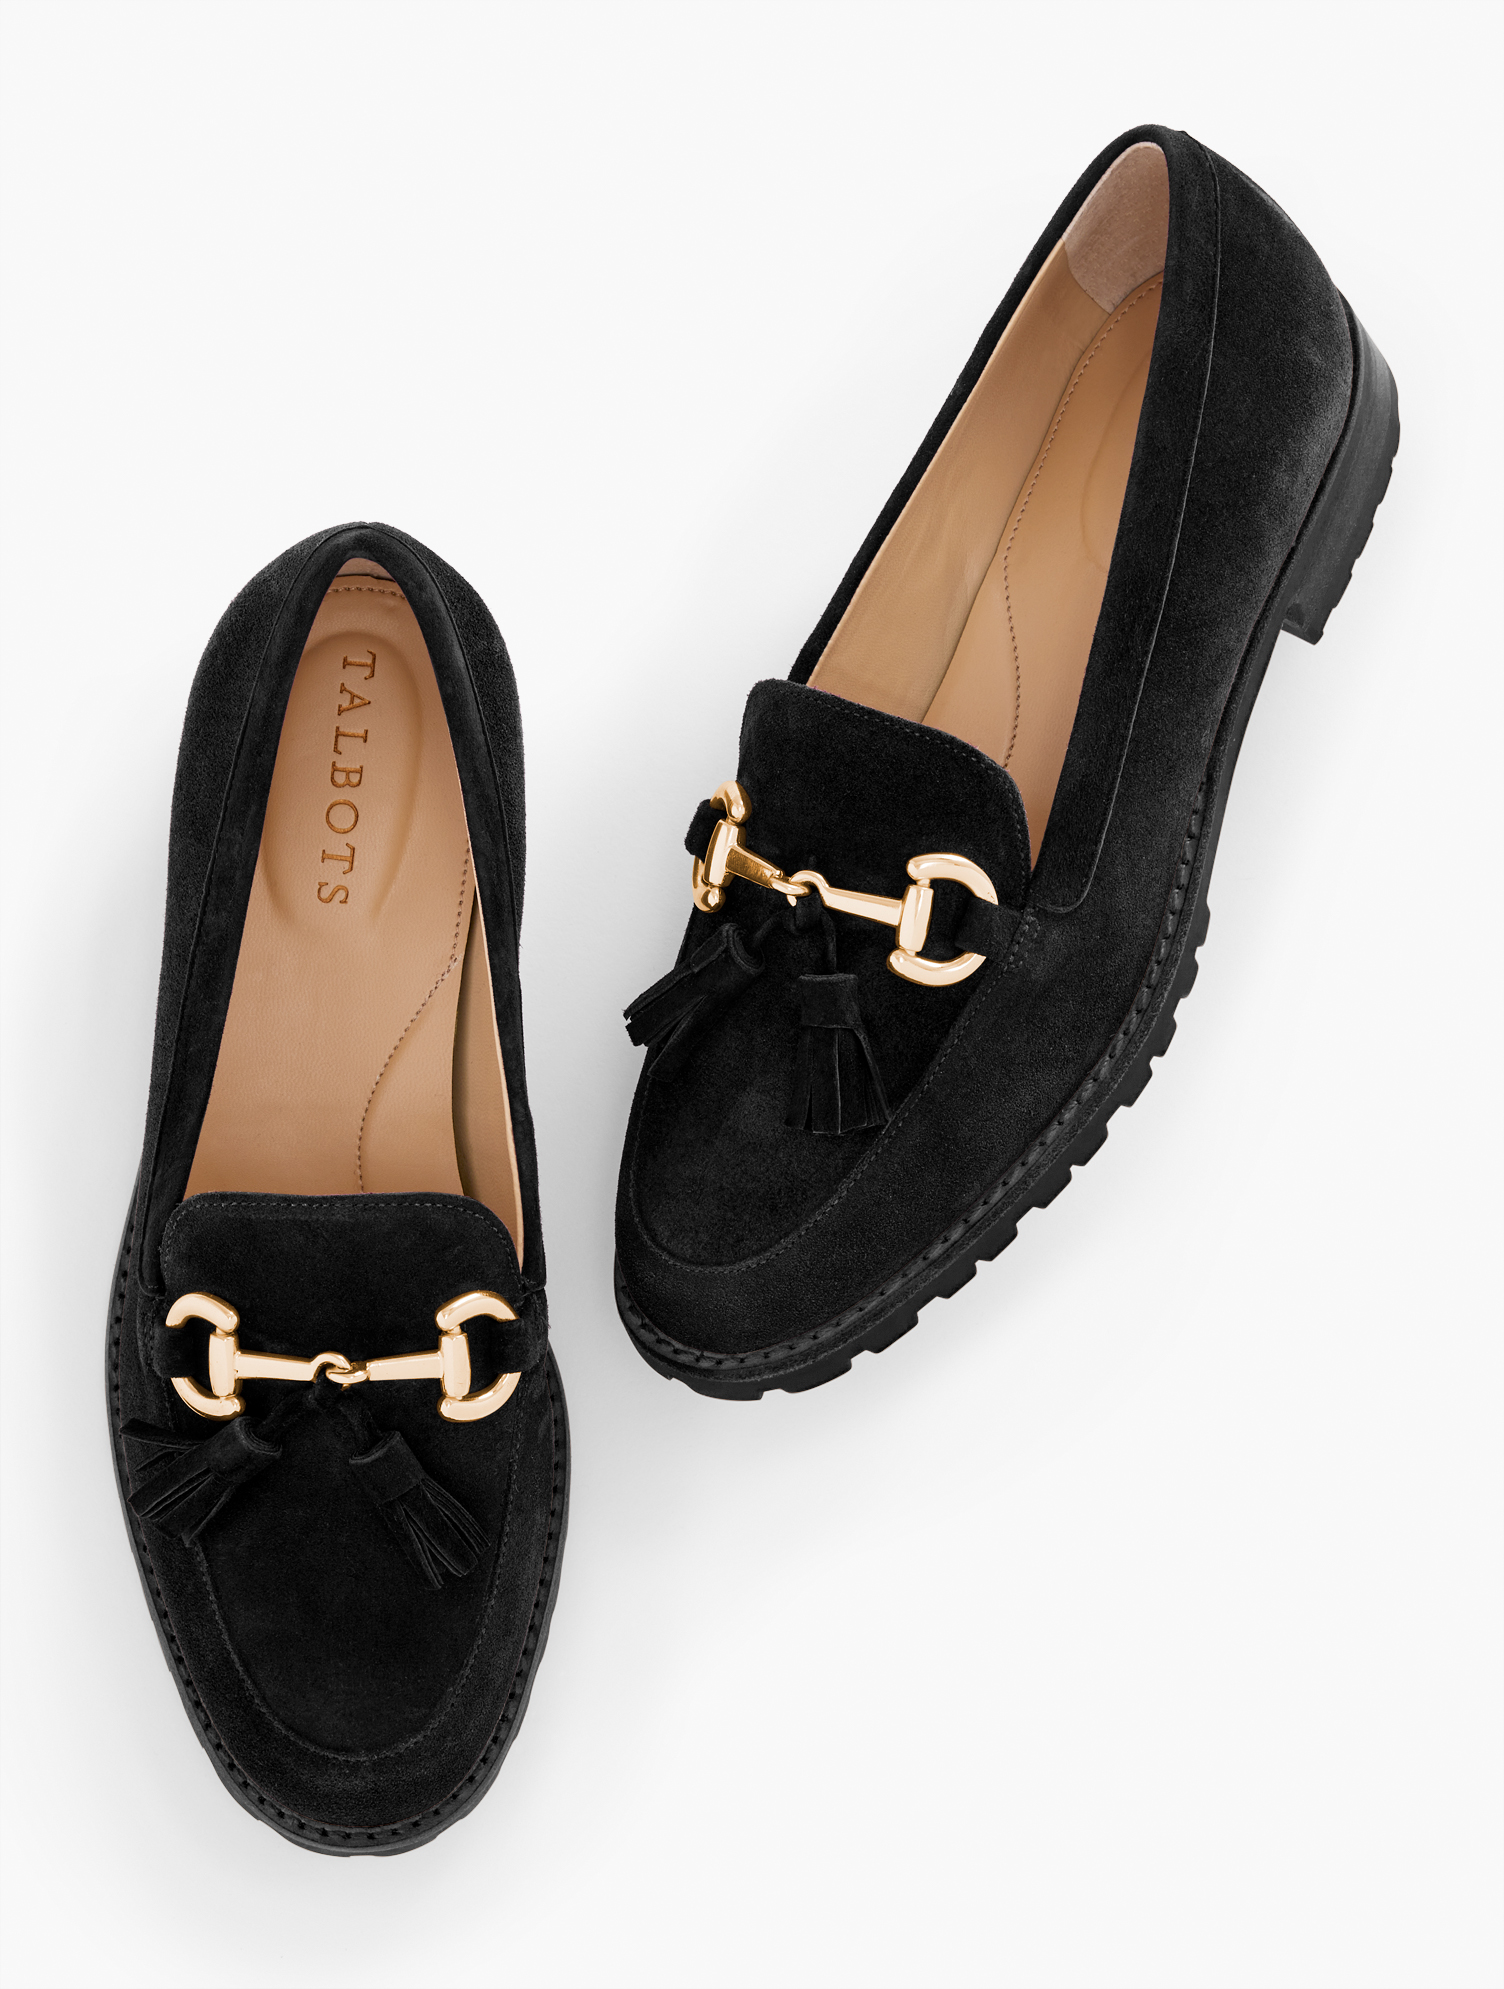 Talbots Cassidy Tassel Loafers - Suede - Black - 11m